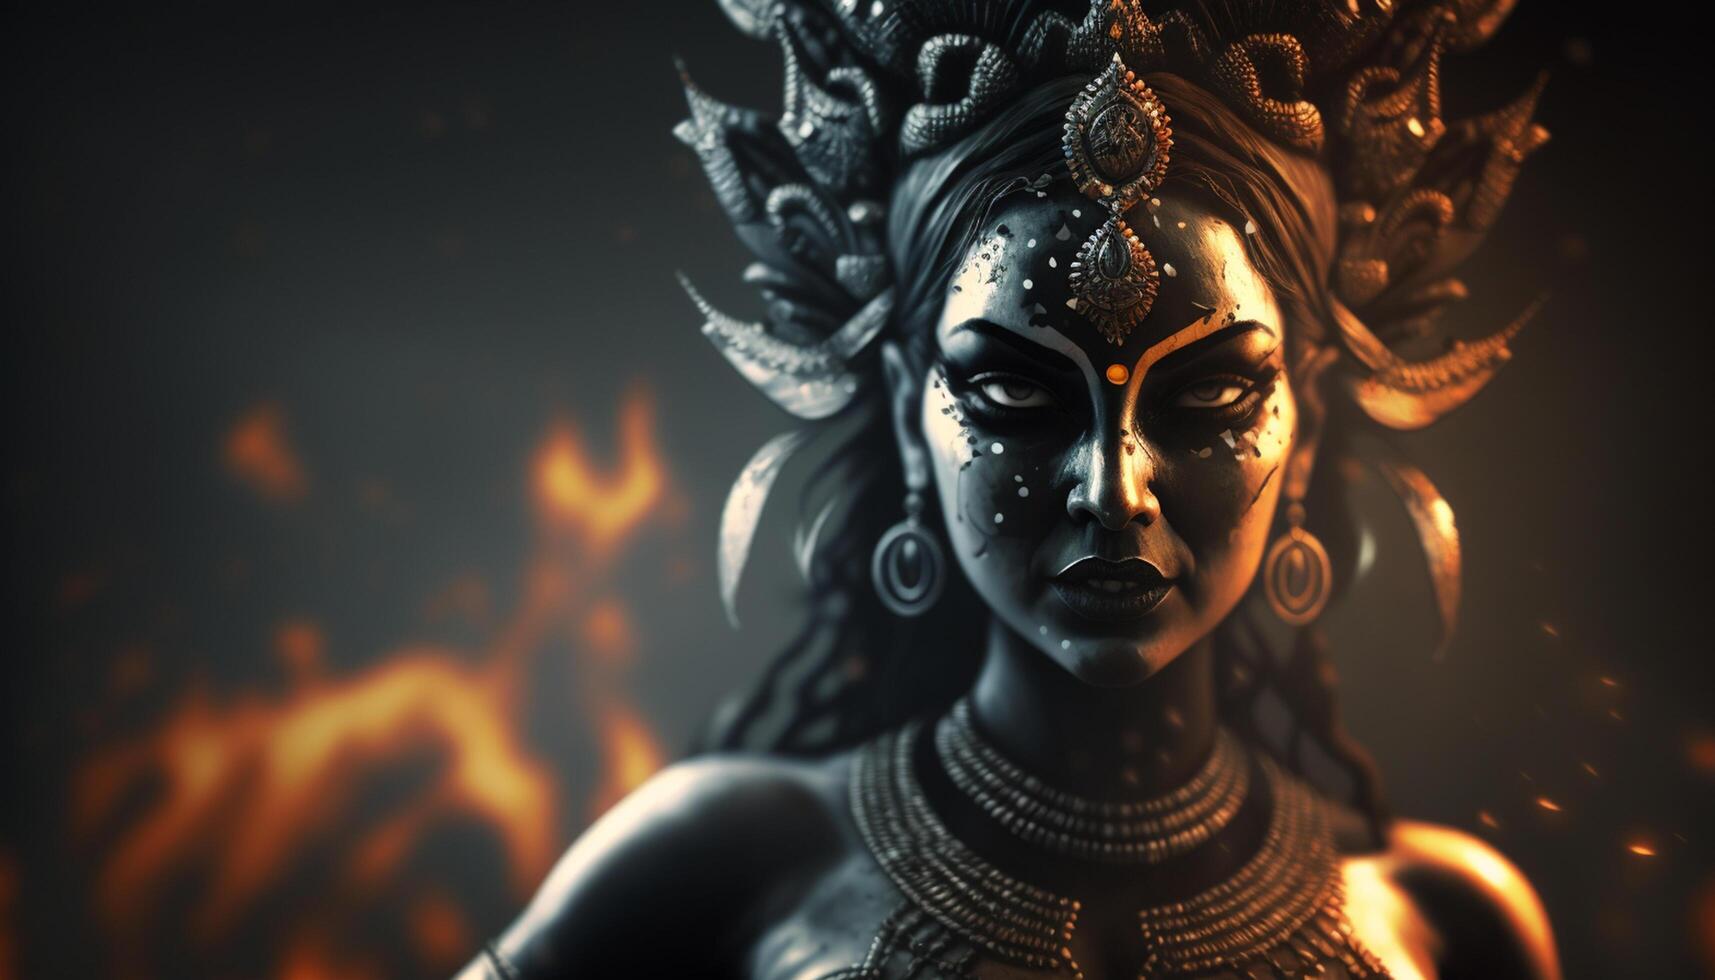 Powerful depiction of Kali, the Hindu goddess of destruction and renewal photo